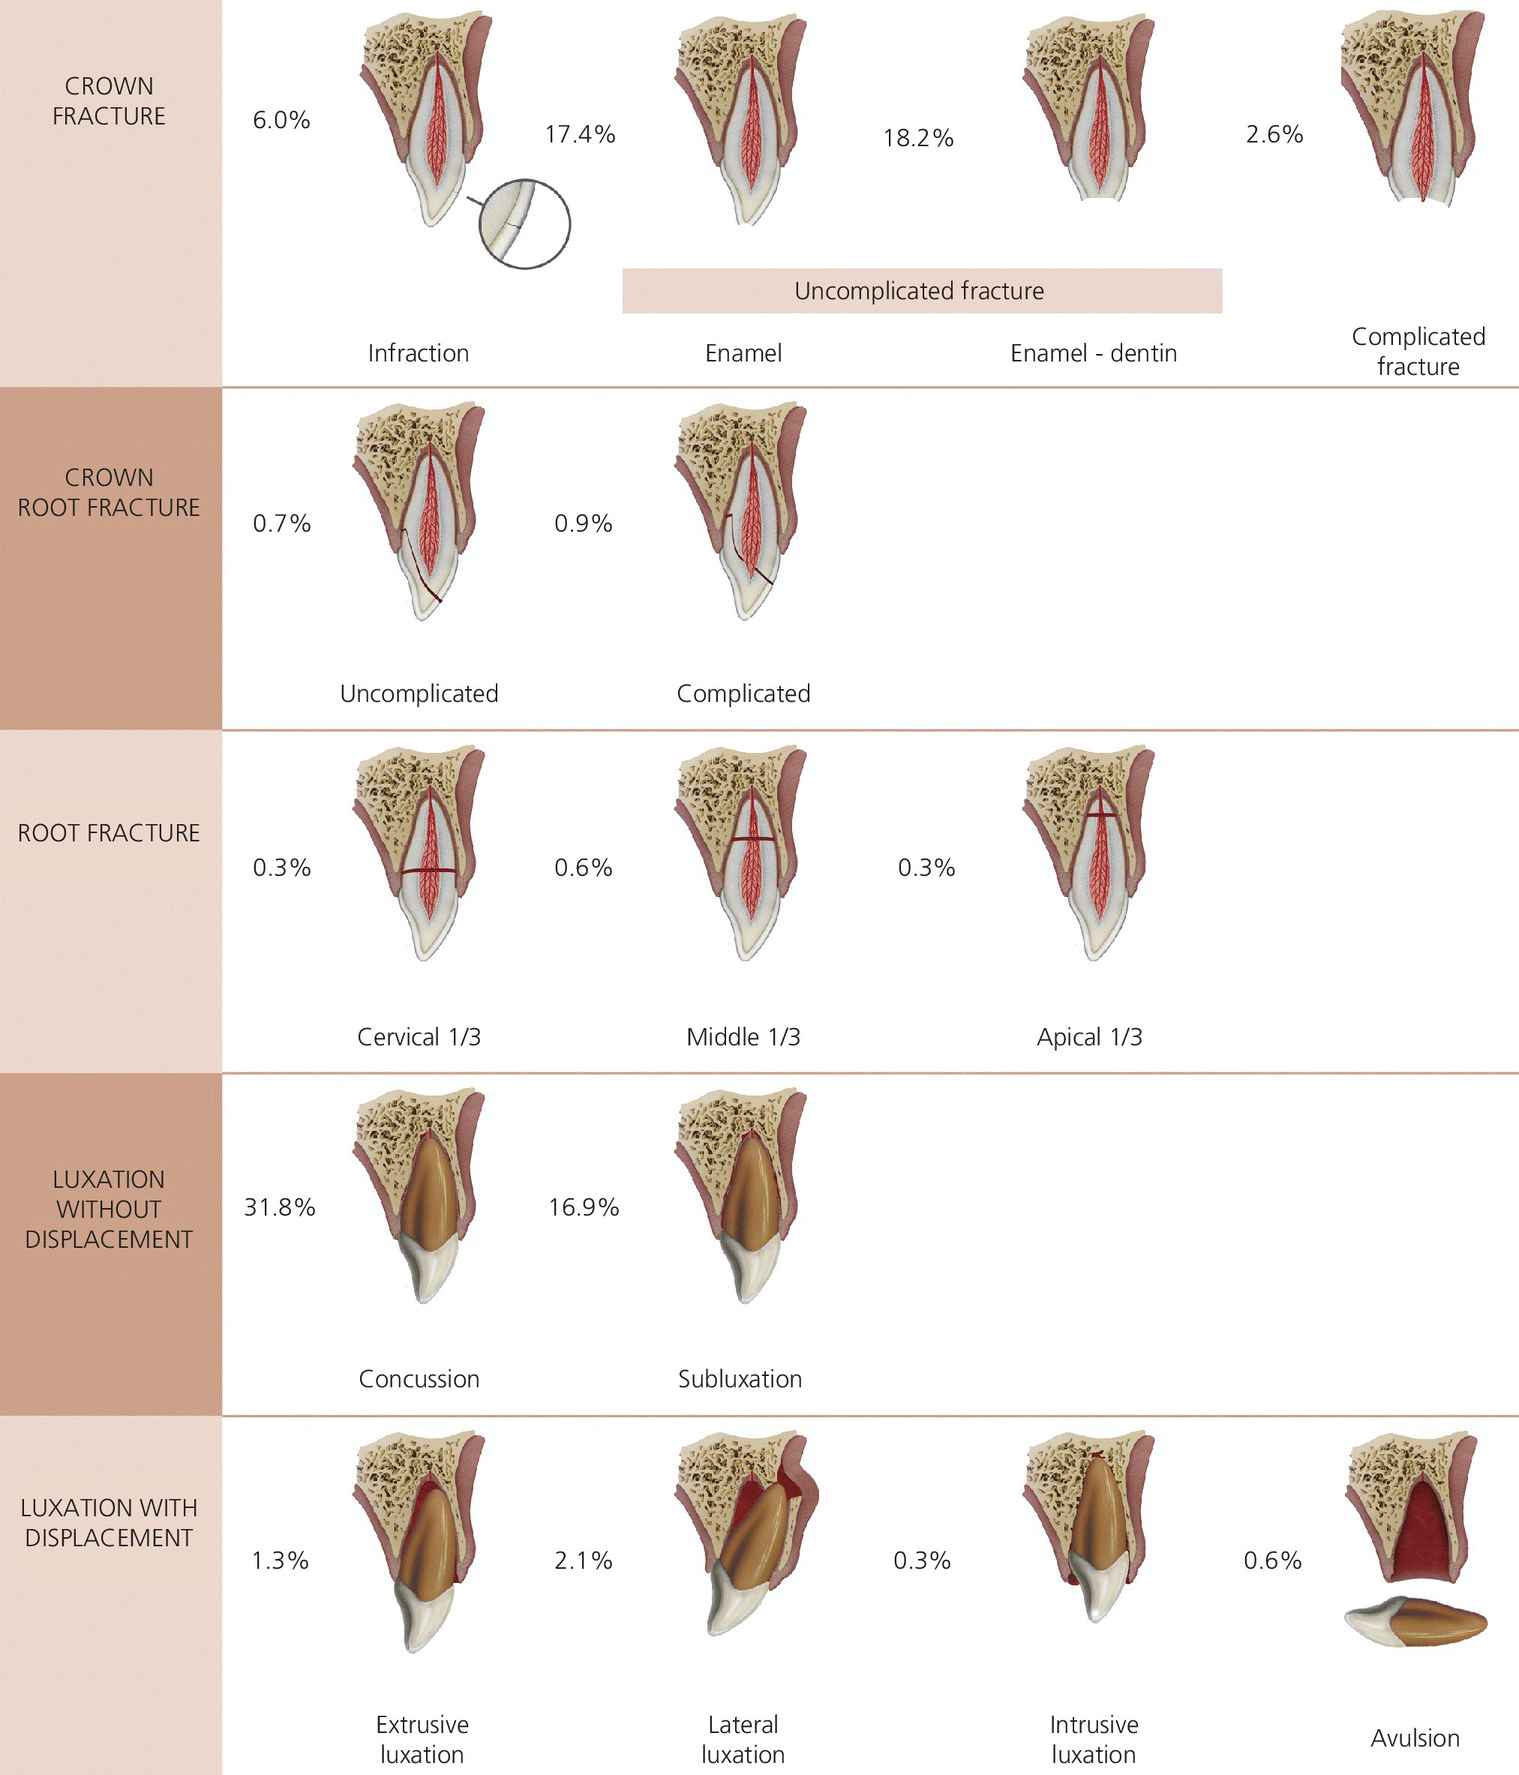 Illustrations of the distribution of 2019 traumatized permanent teeth with crown fracture, crown root fracture, root fracture, and luxation with and without displacement.